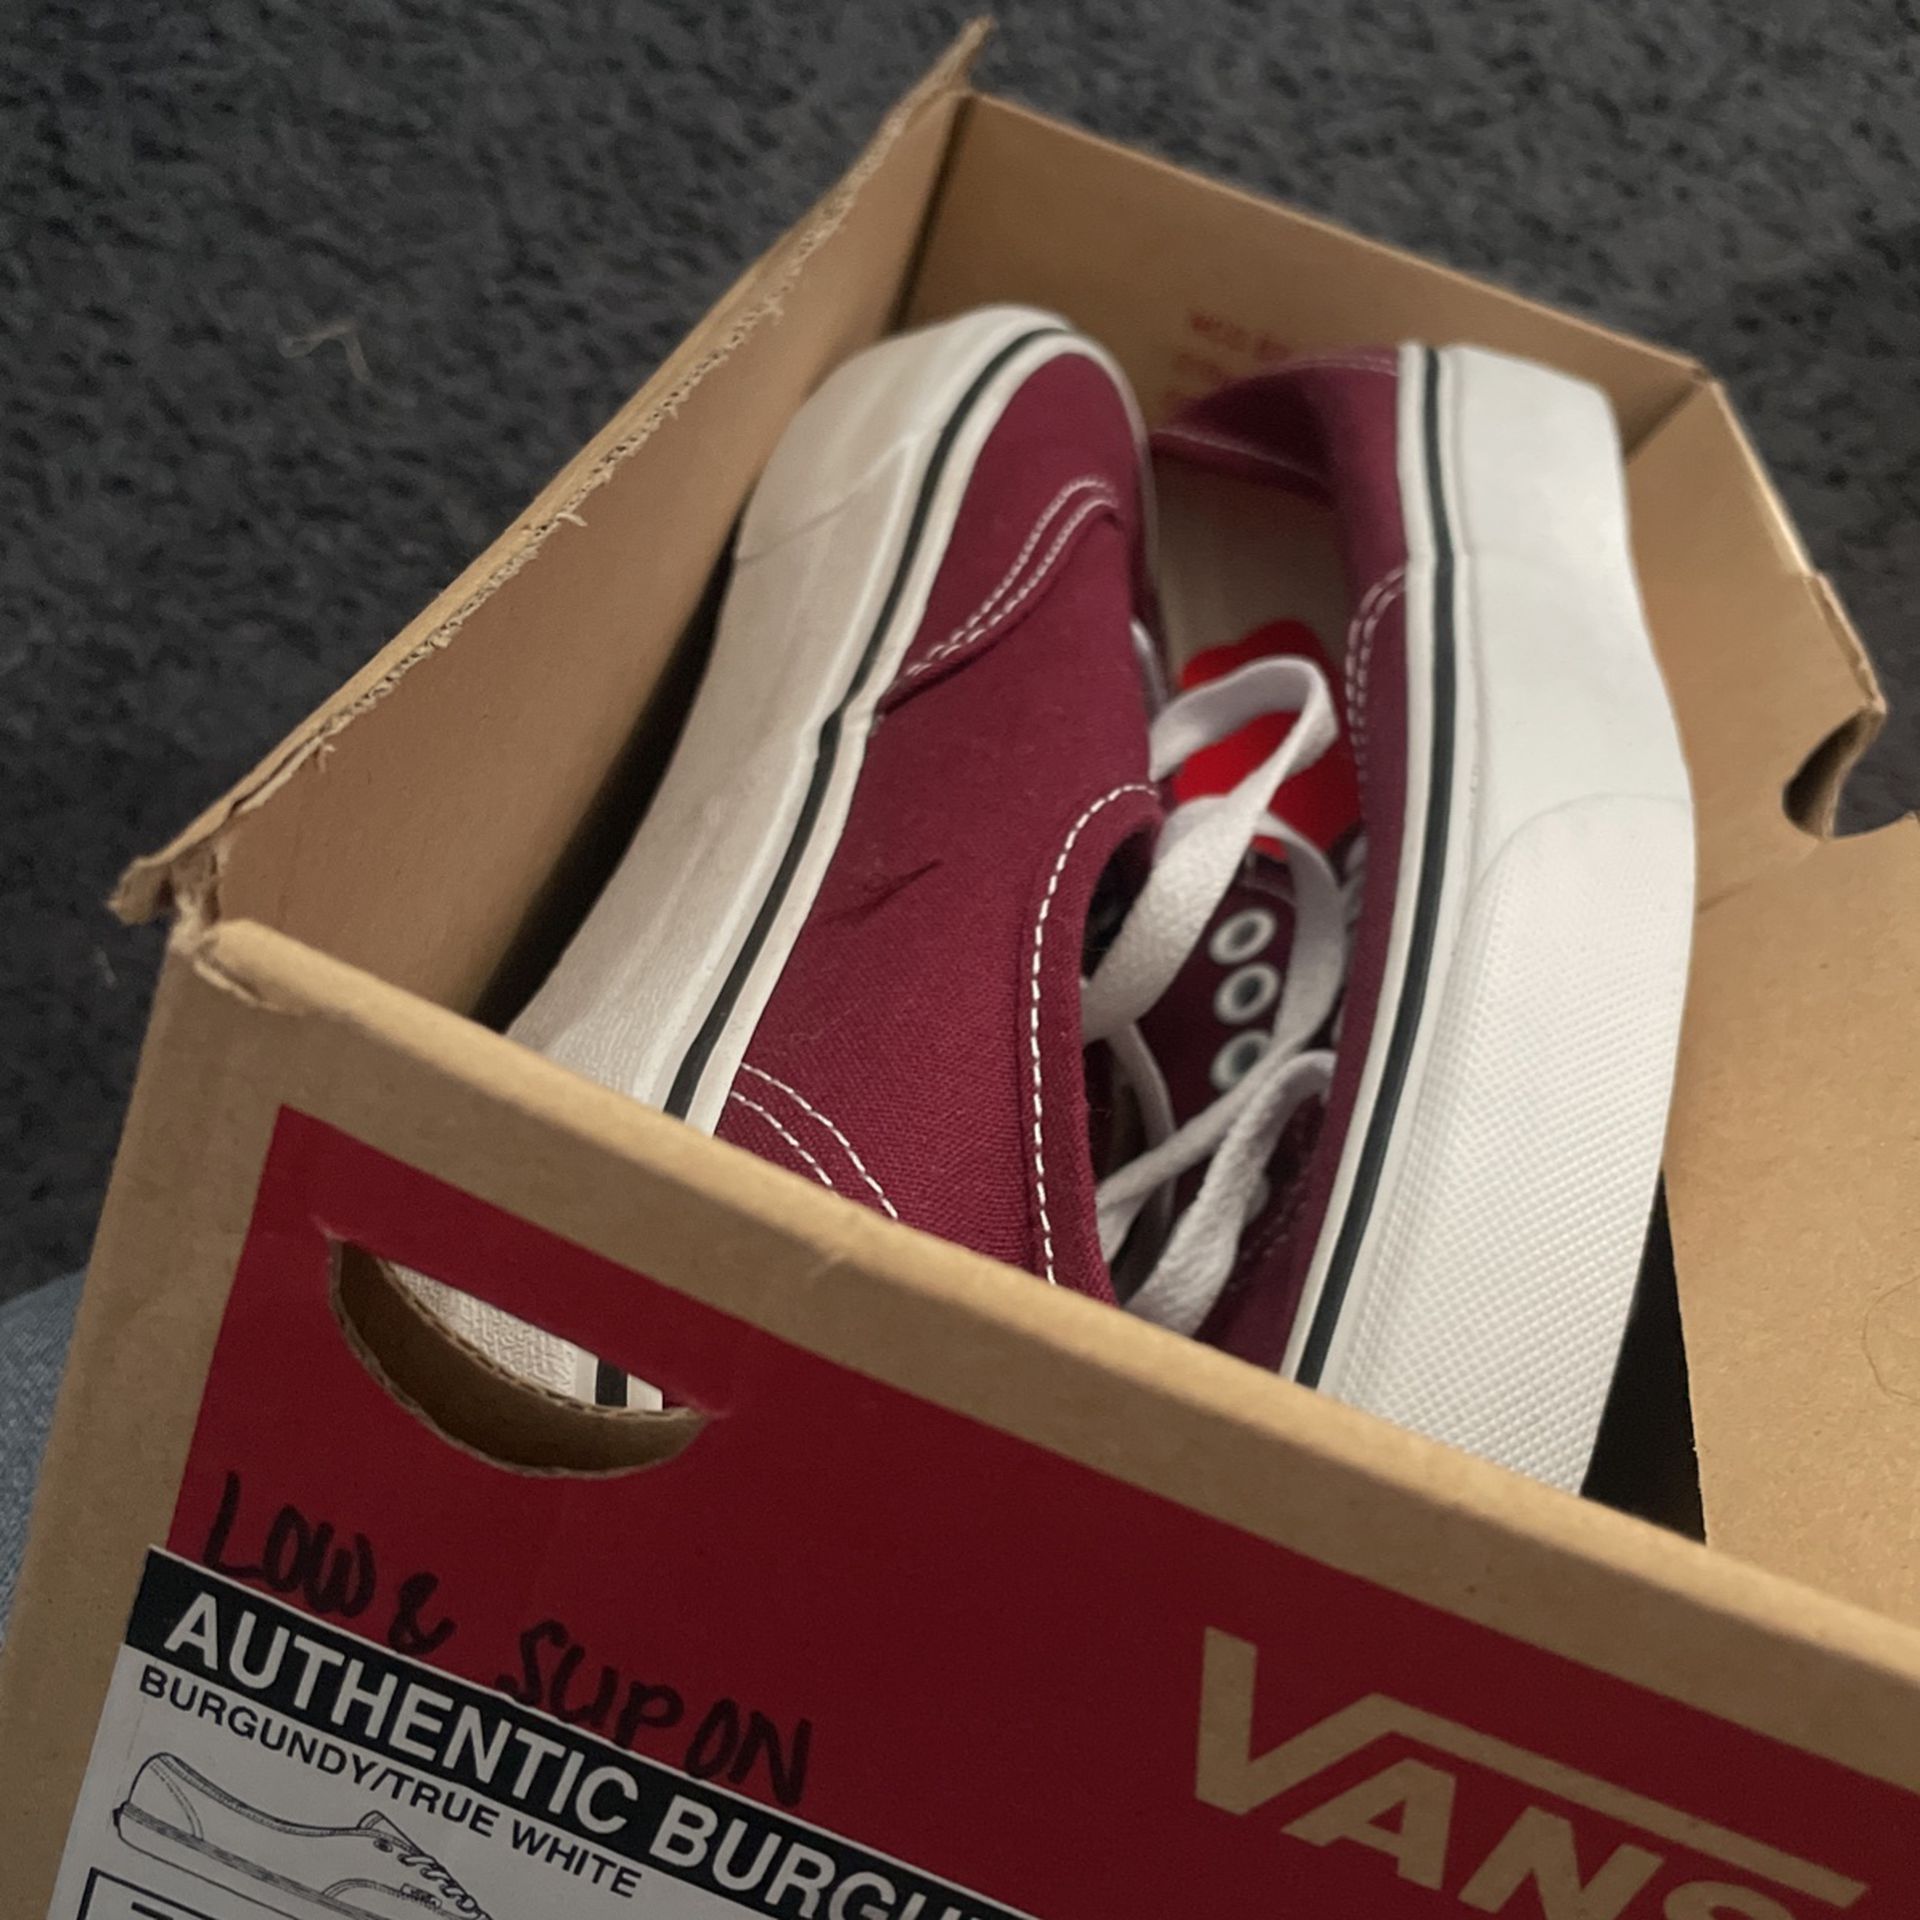 New Burgundy Vans Shoes for Sale in Victorville, CA - OfferUp